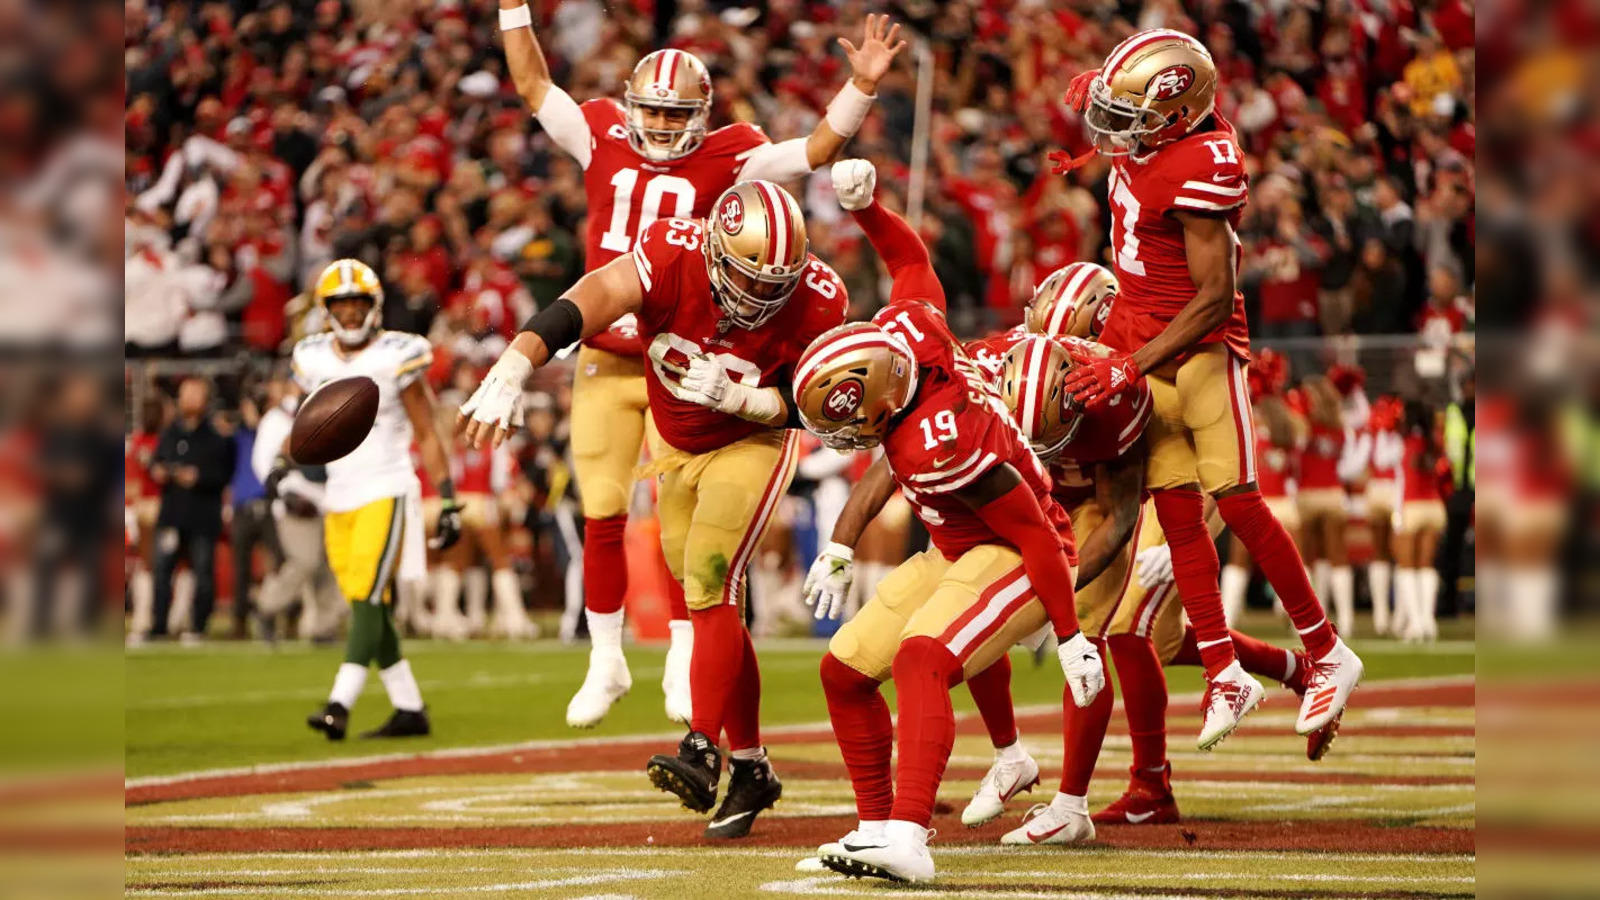 Packers vs 49ers playoffs live streaming, weather forecast, start time